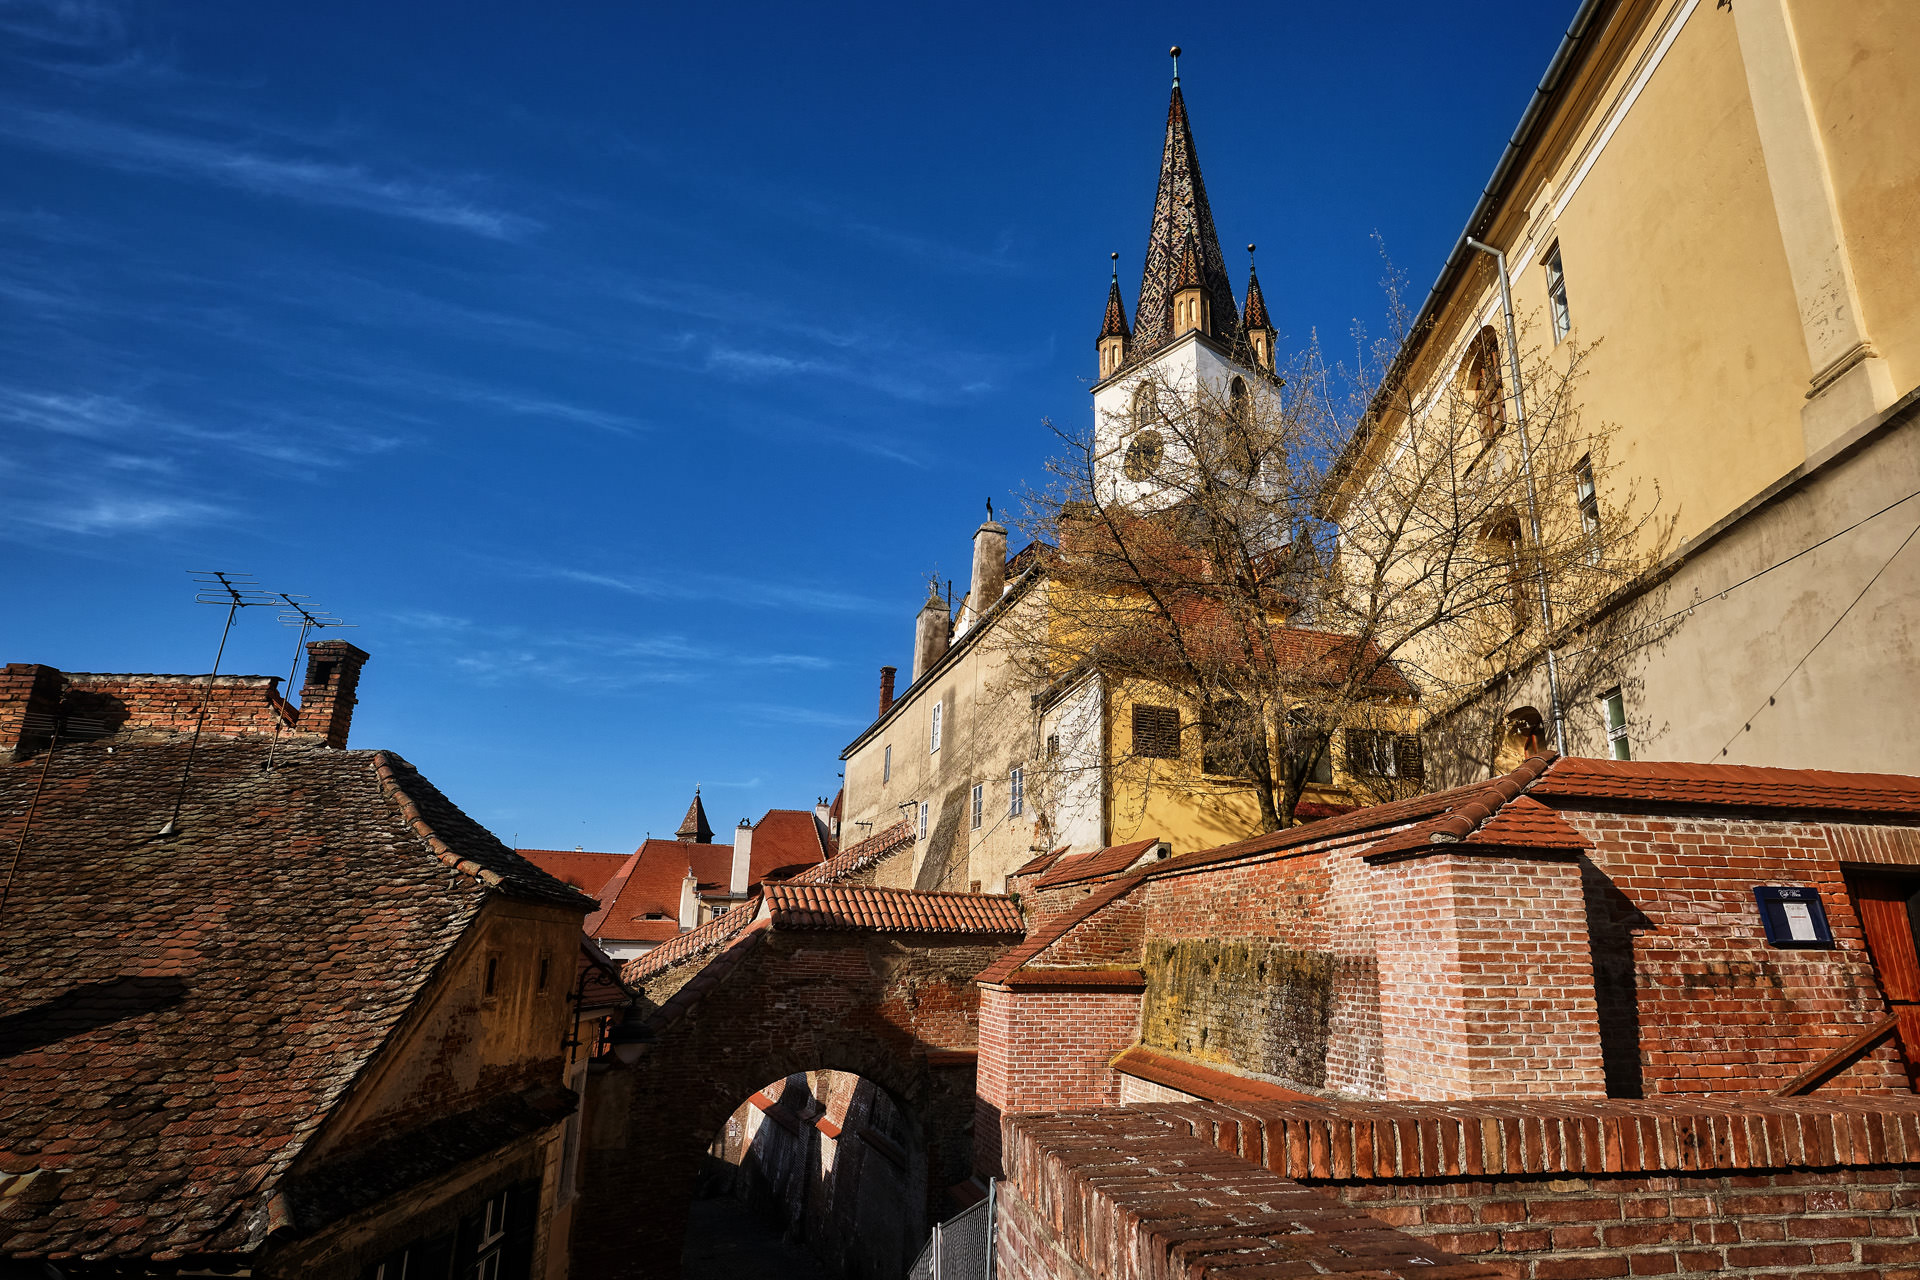 Details of Medieval Sibiu in Romania